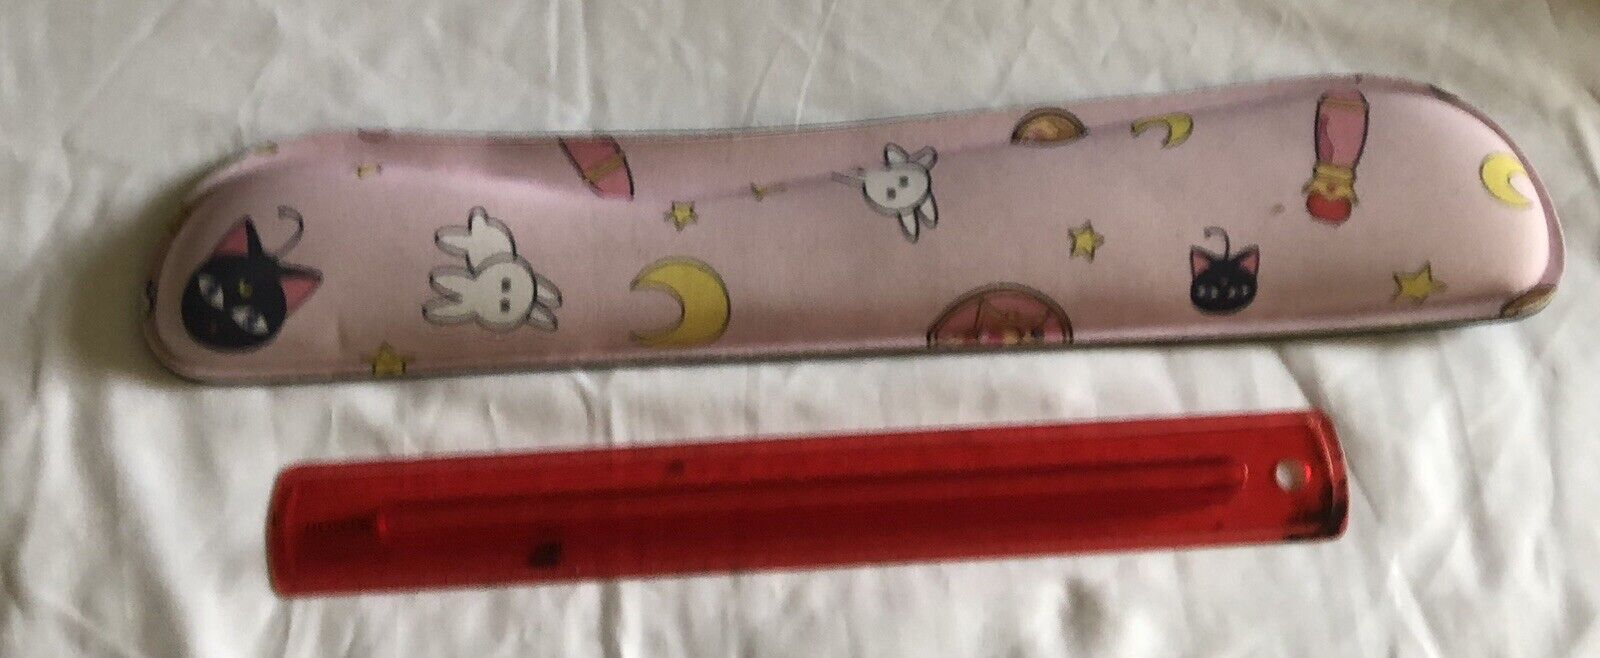 Sailor Moon Luna Wrist Rest Support Cute Kawaii Non Slip Base Great For Gaming